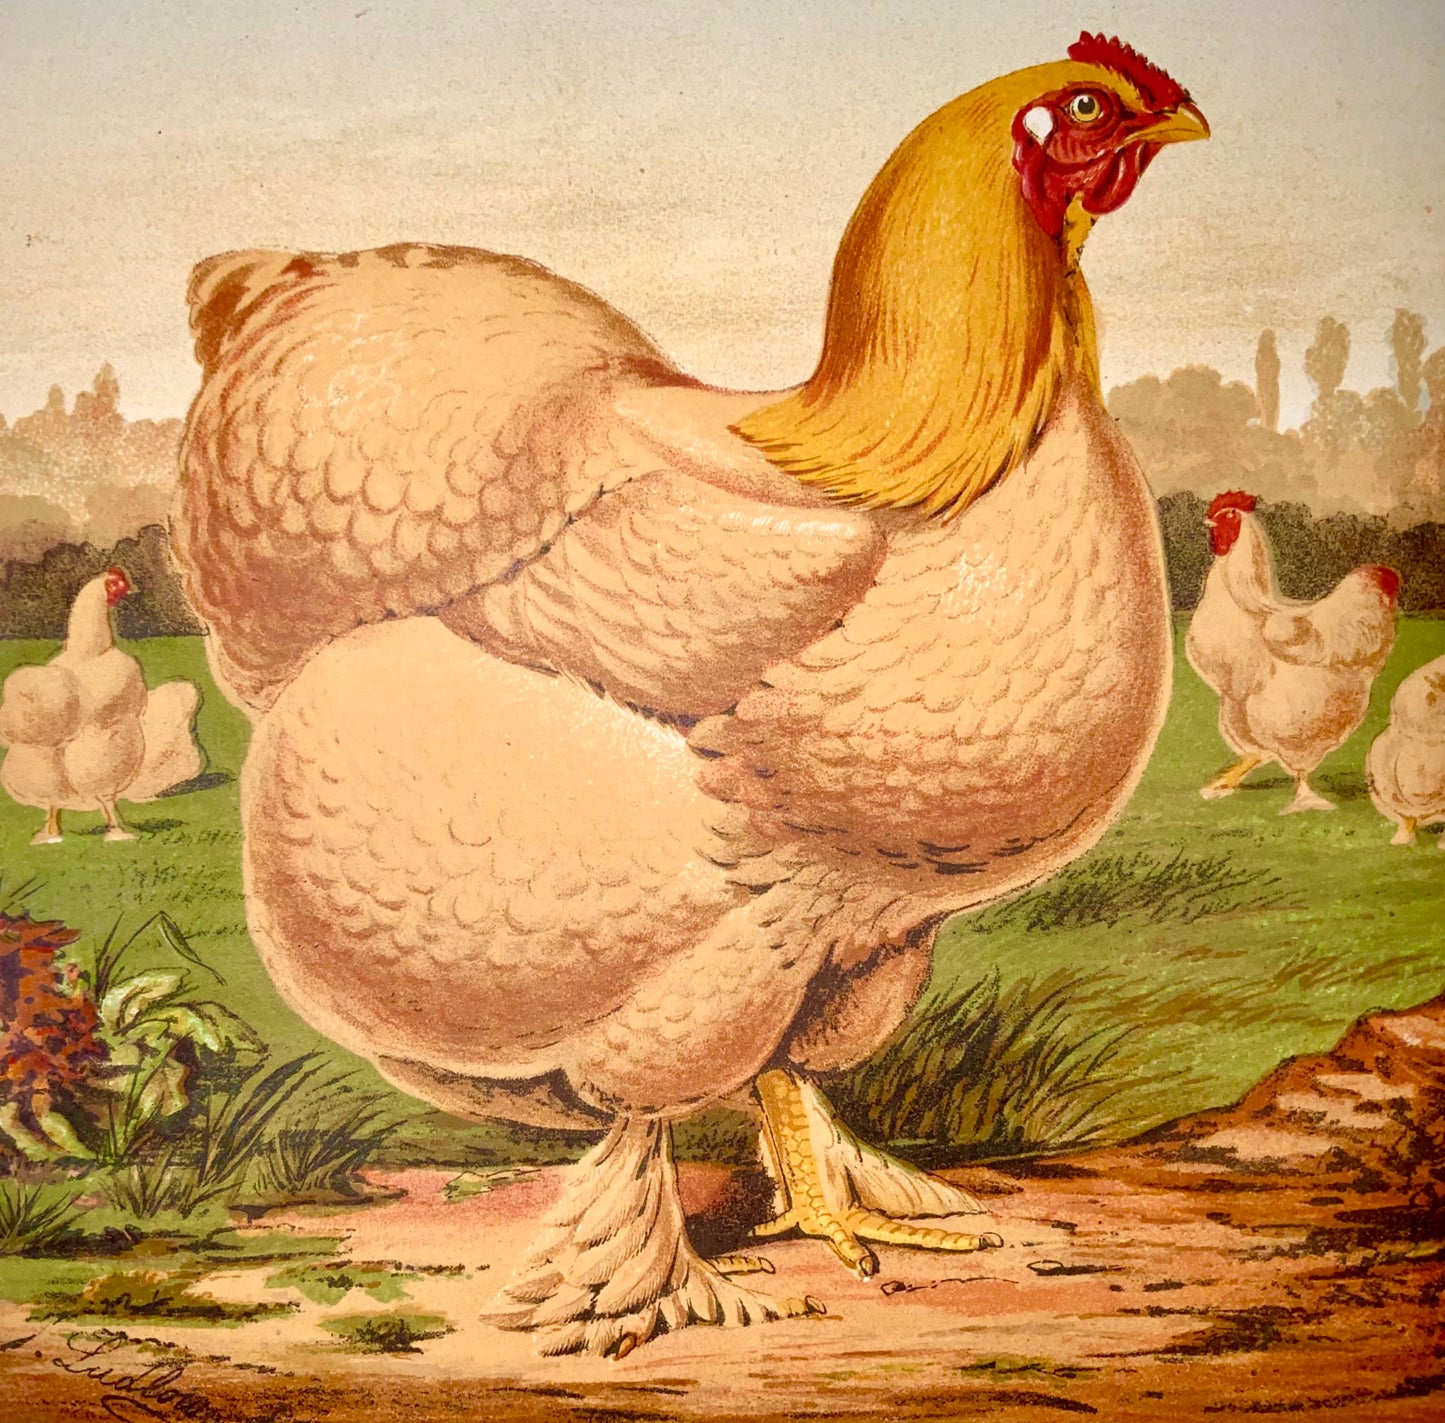 1873 First Issue - Ludlow for Wright COCHIN HEN Poultry quarto chromolithograph - Ornithology